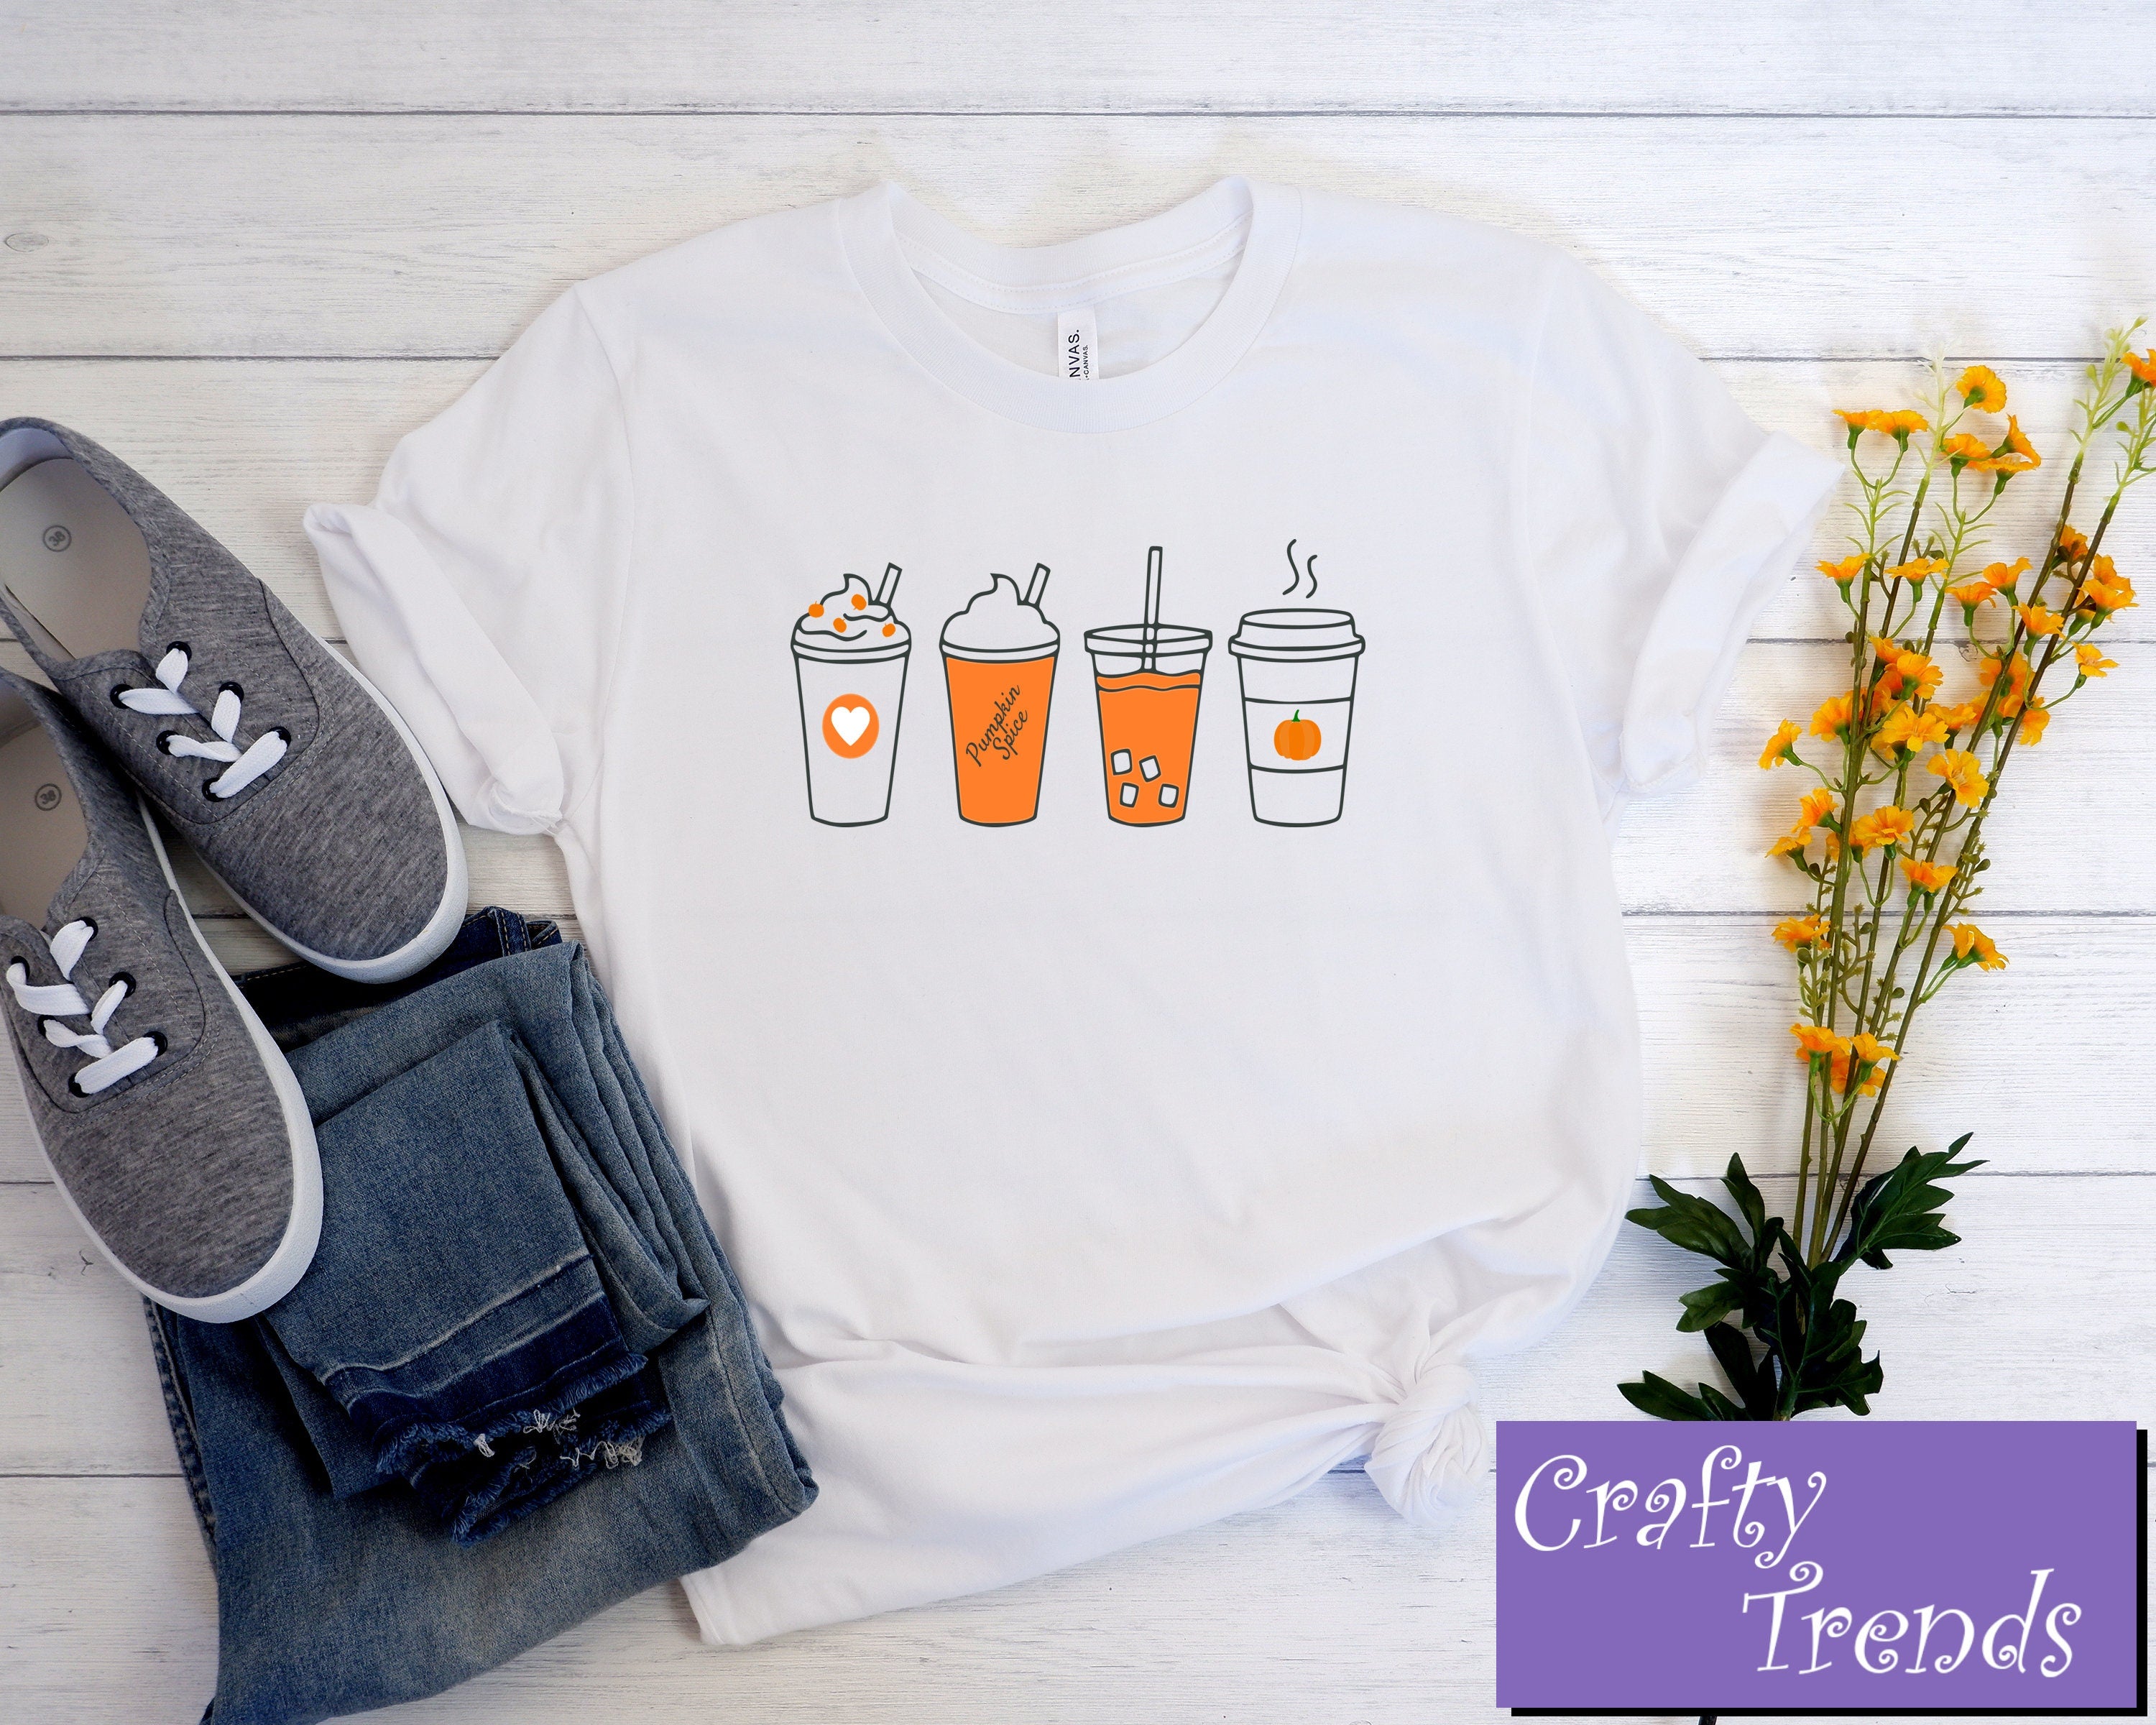 Crafty Trends Store - Trendy Designs for the Entire Family